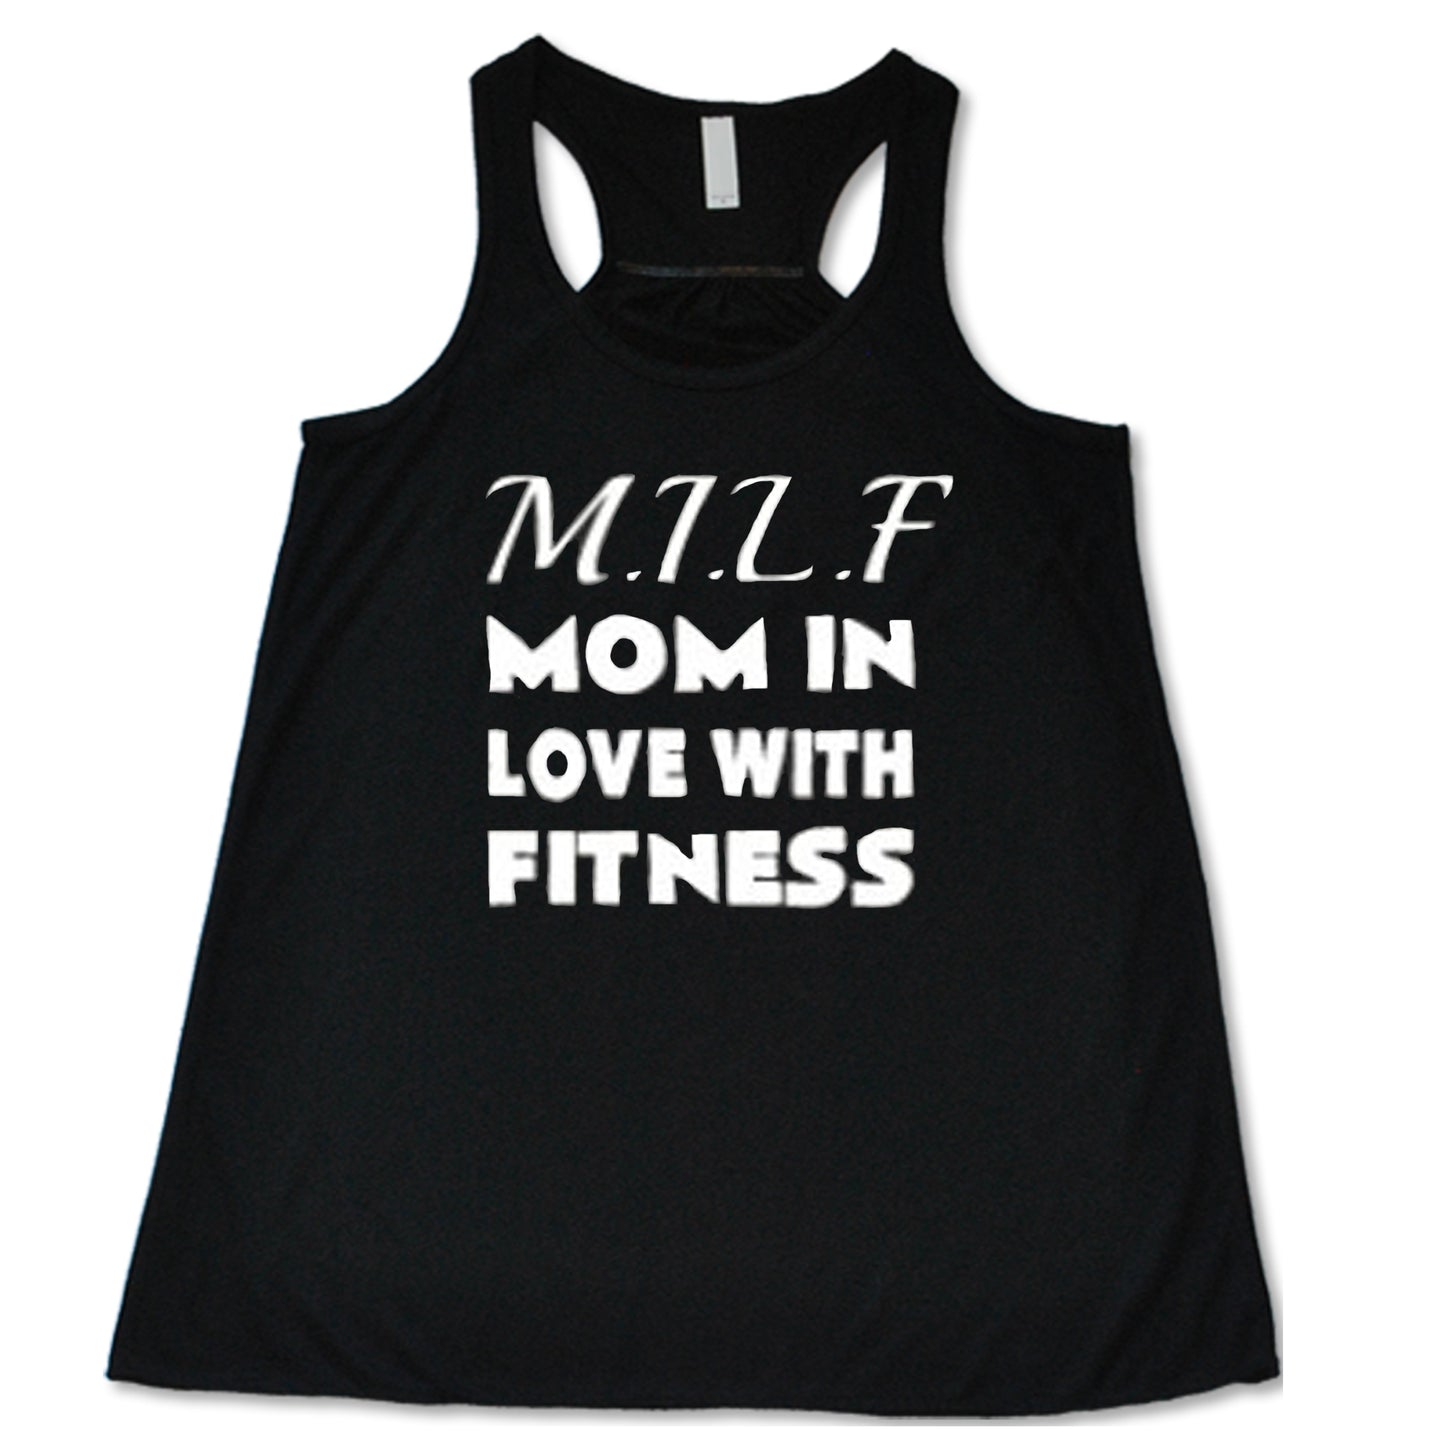 Milf Mom In Love With Fitness Shirt